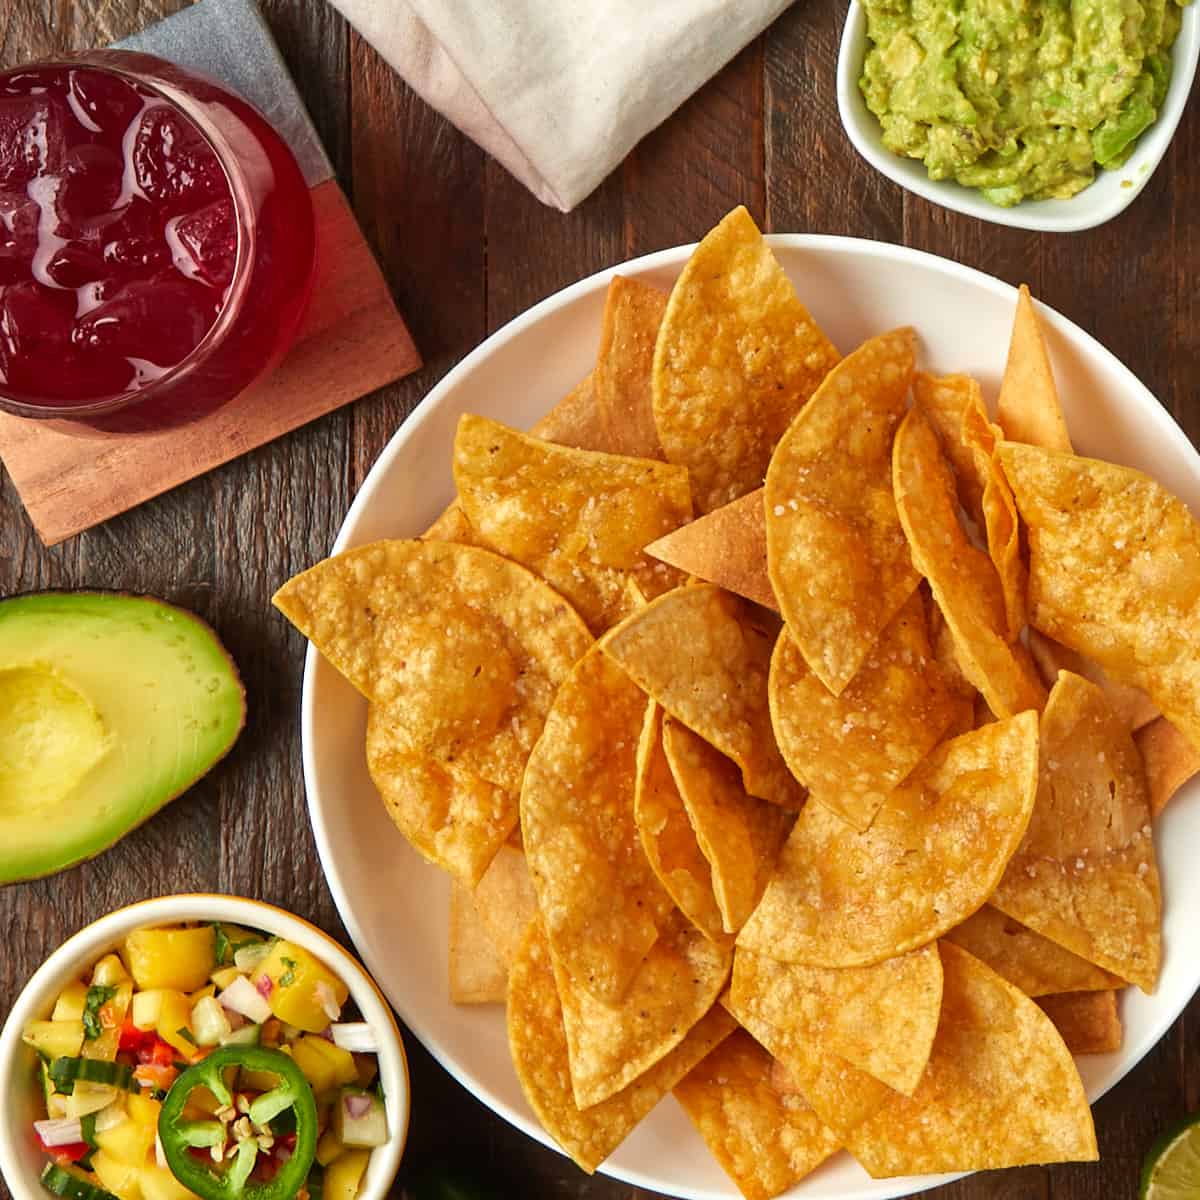 tortilla chips in a bowl with a side of guacamole and mango salsa along with a margarita on the rocks.